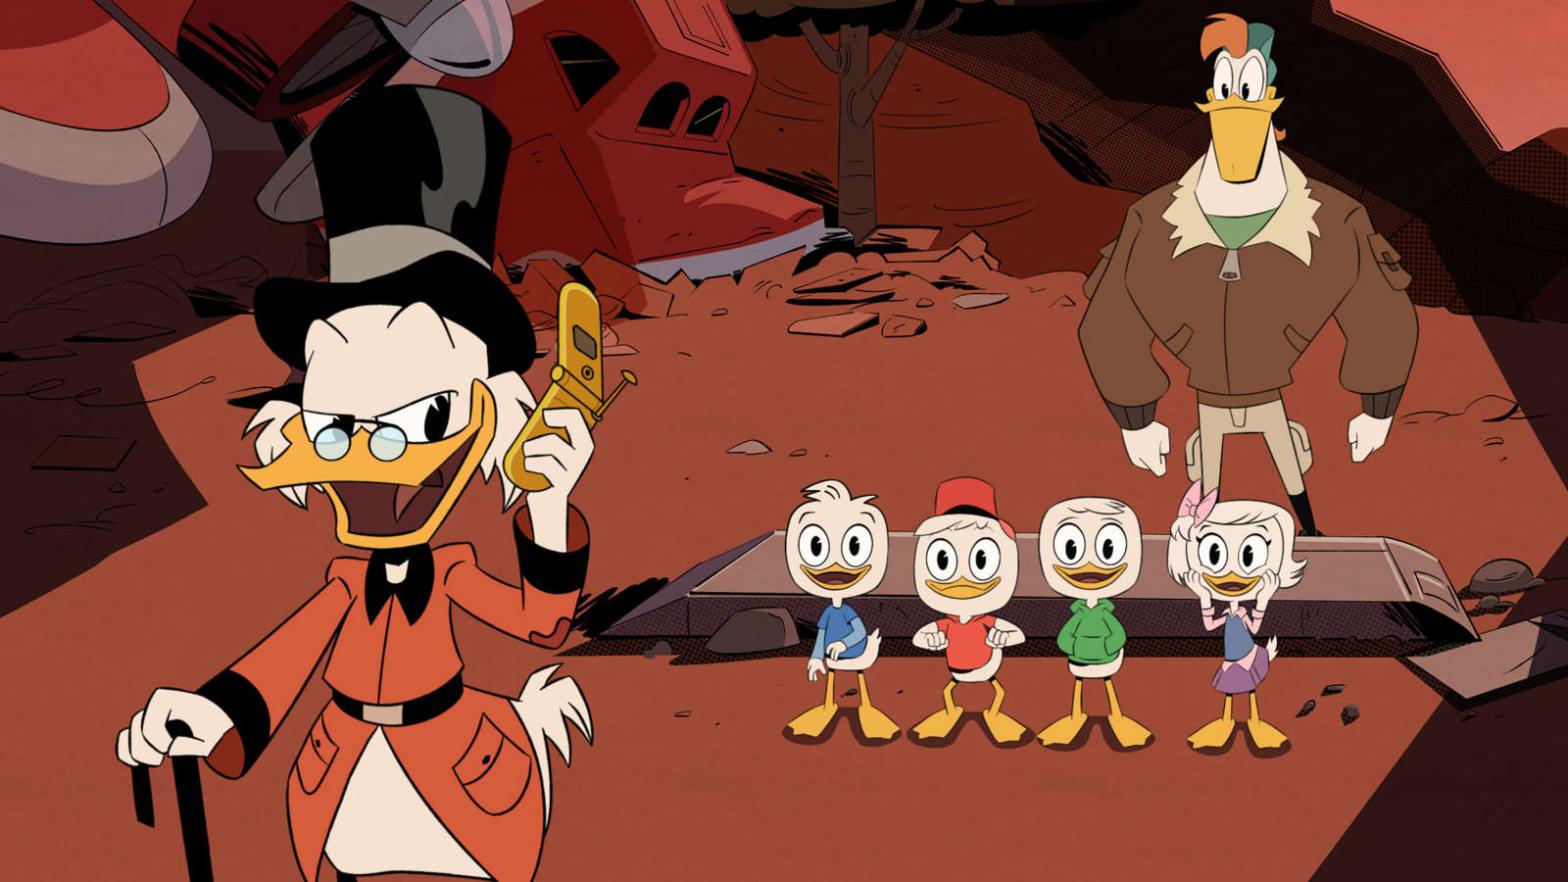 Whoo-oo is now officially Boo-oo. (Image: Disney XD)